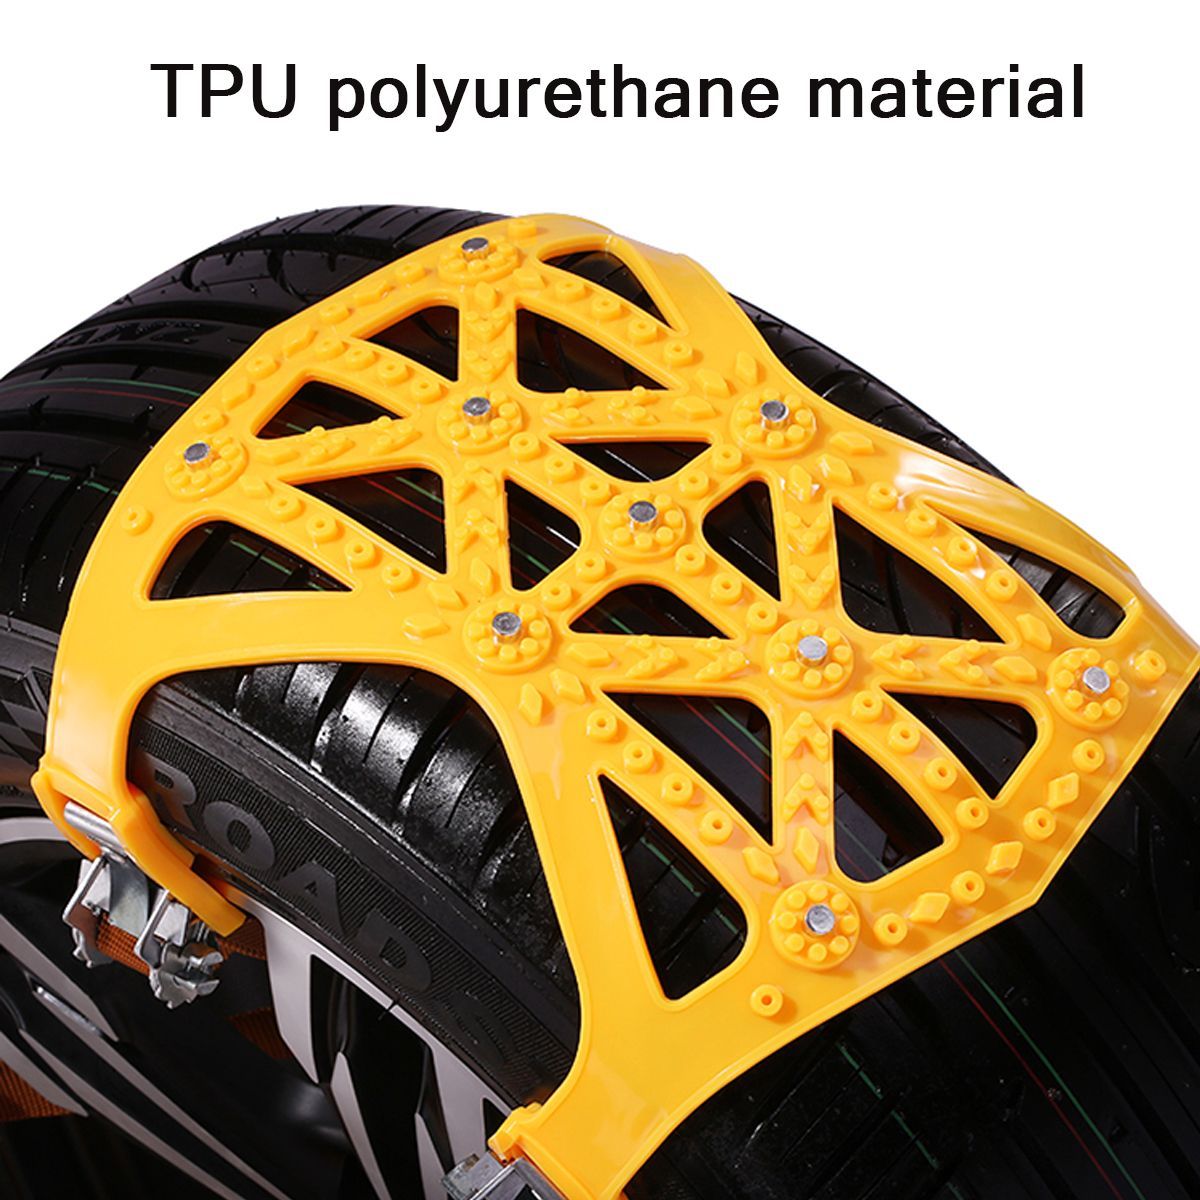 Emergency-Gear-Clasp-Car-Snow-Chain-Wheel-Tyre-Anti-skid-TPU-Chain-for-Ice-Mud-Sand-Safety-Driving-1602324